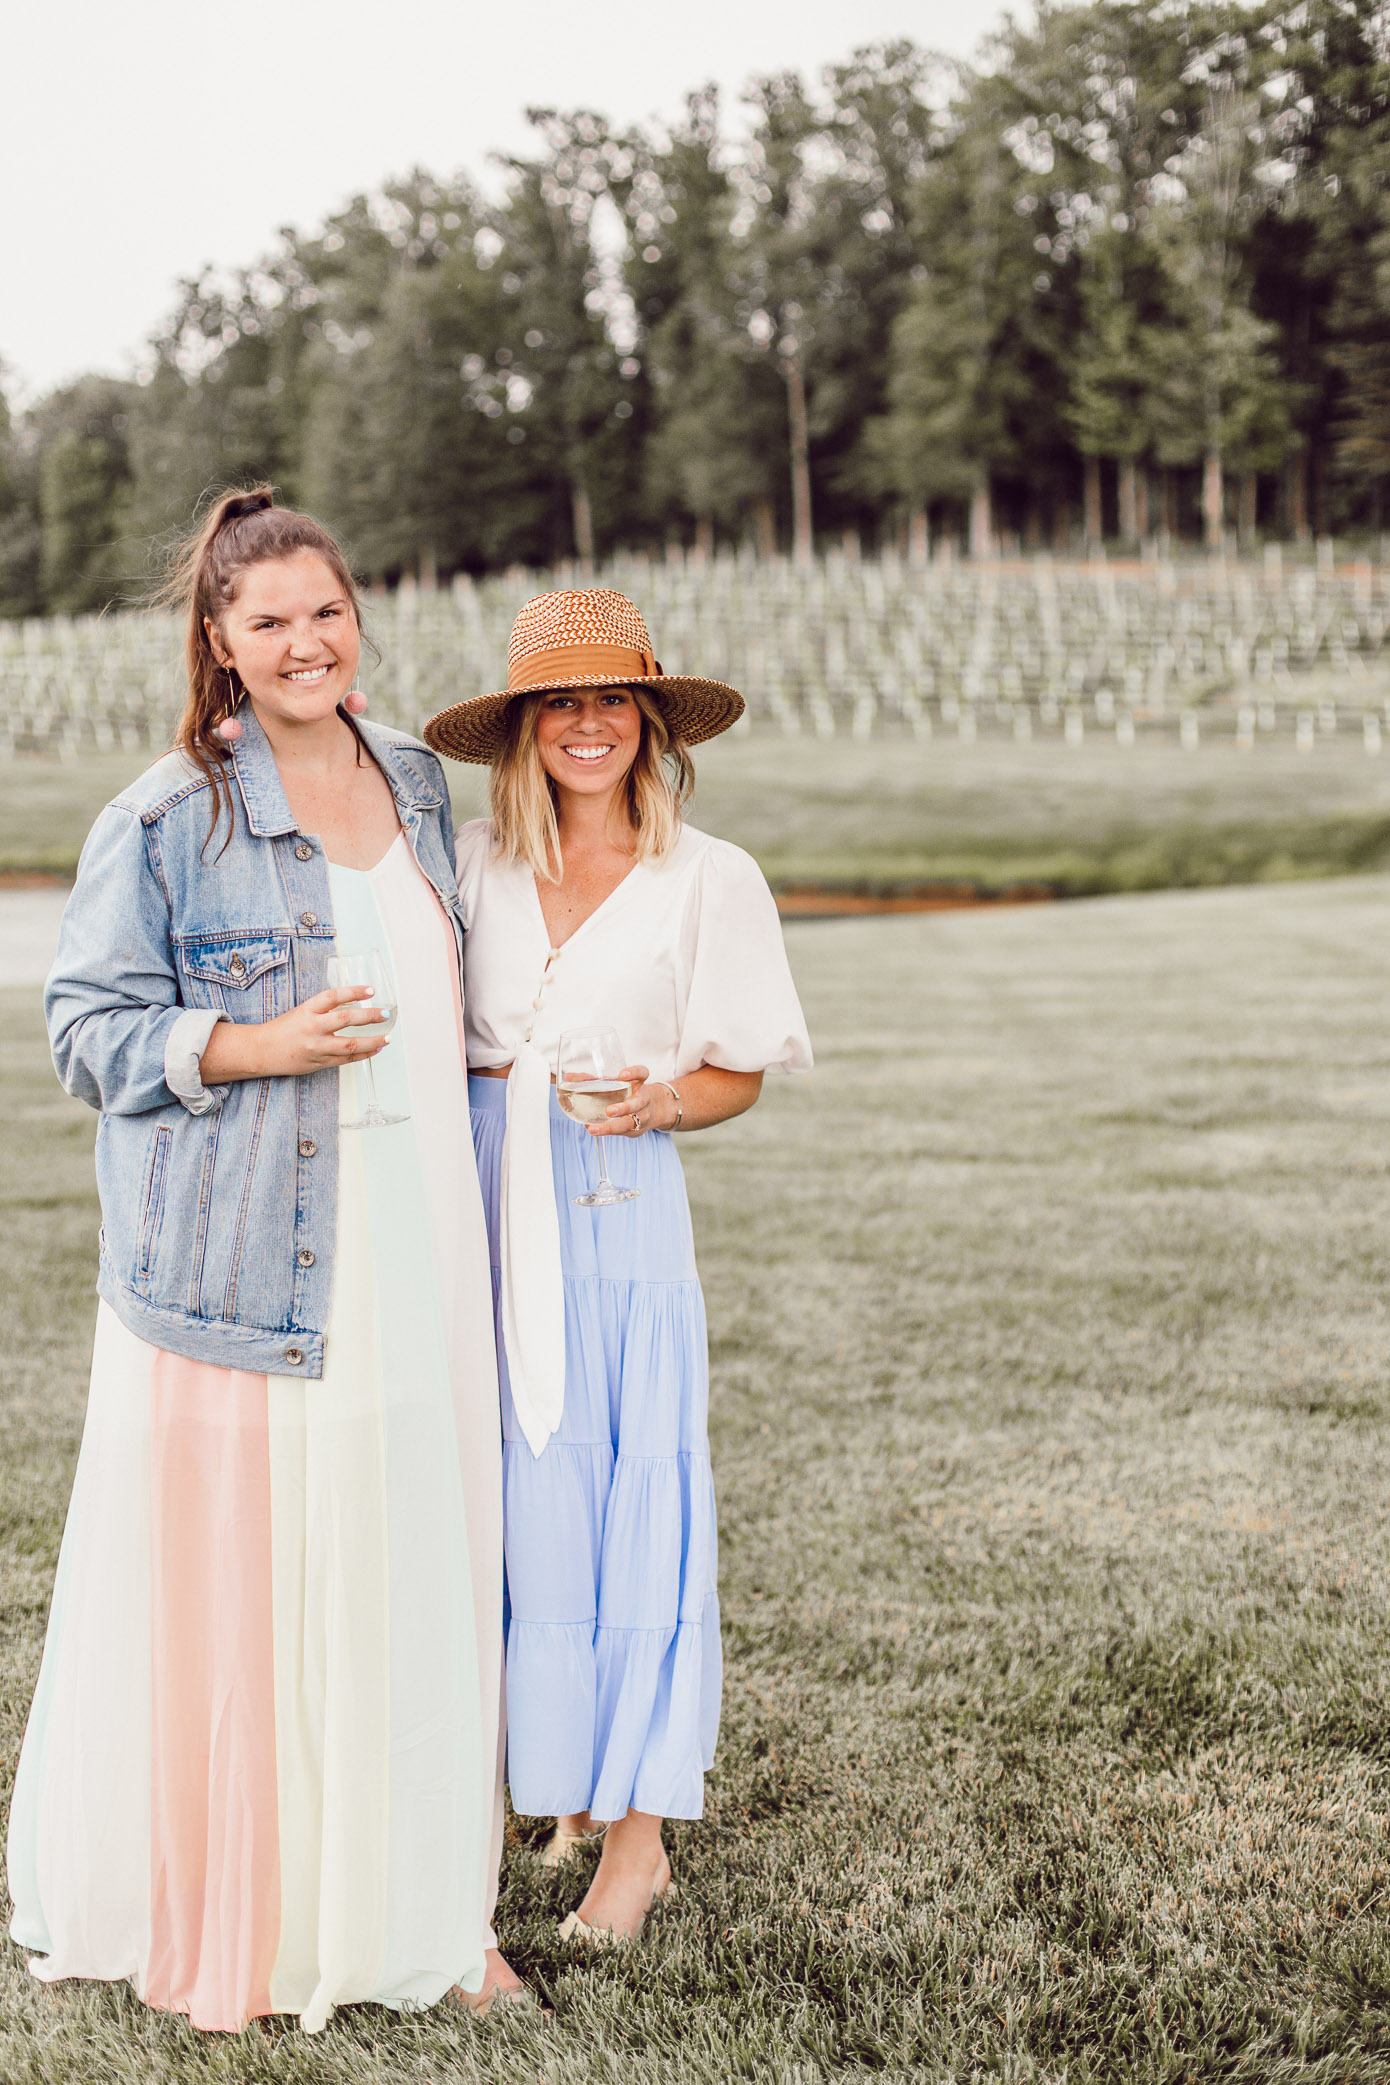 What to Wear to a Winery | White Tie-Front Crop Top, Blue Maxi Skirt | Louella Reese